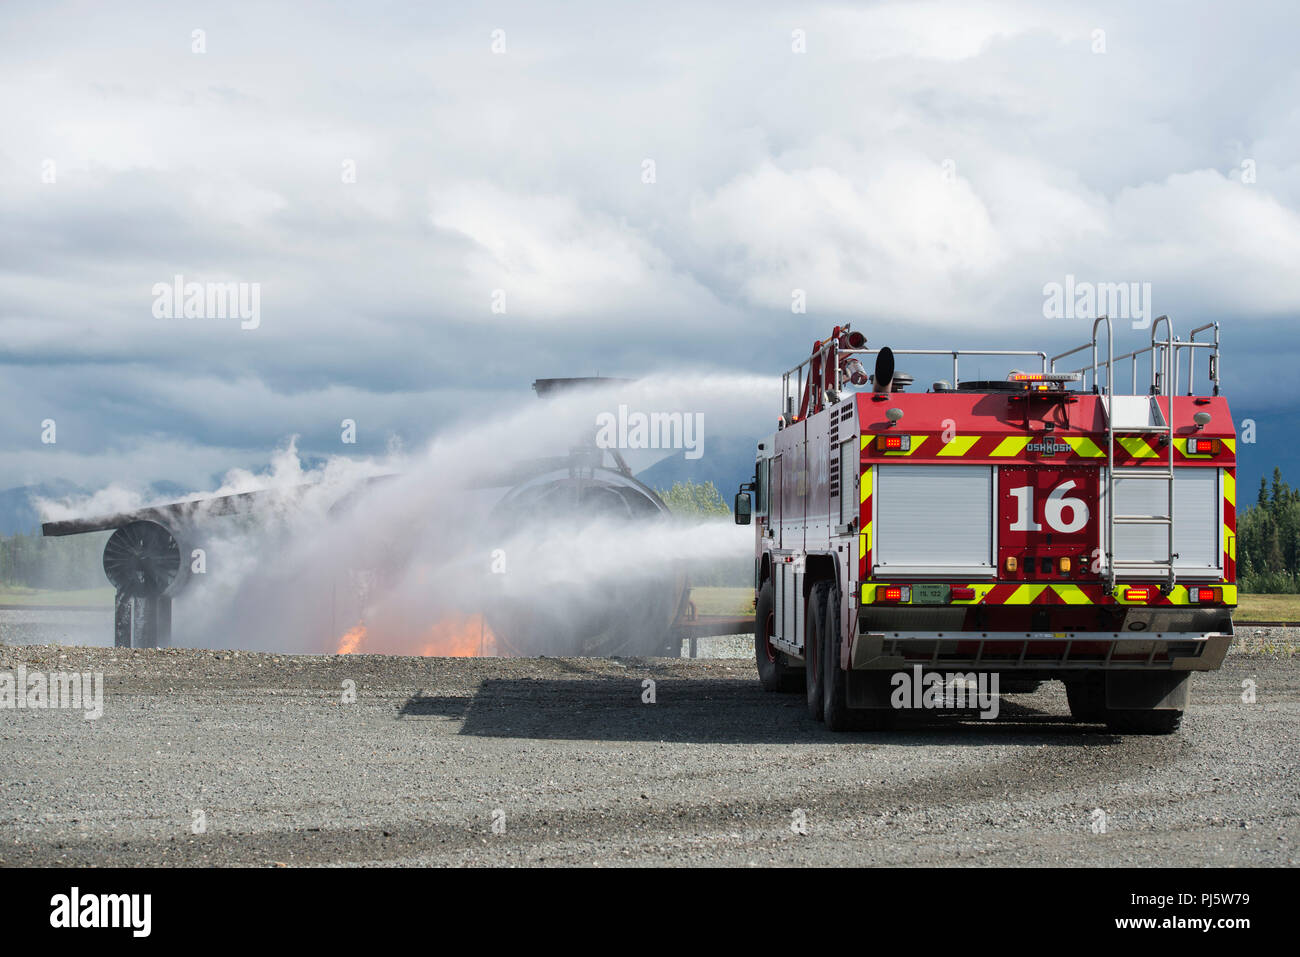 U.S. Air Force fire protection specialists assigned to the 673d Civil Engineer Squadron, spray water from their Striker aircraft rescue and firefighting vehicle while responding to a simulated aircraft fire during wartime-firefighting readiness training at Joint Base Elmendorf-Richardson, Alaska, Aug. 24, 2018. During the readiness training the Air Force firefighters donned various levels of mission oriented protective posture (MOPP) gear and practiced responding to emergency situations in a simulated toxic environment during a chemical, biological, radiological, or nuclear strike. (U.S. Air F Stock Photo